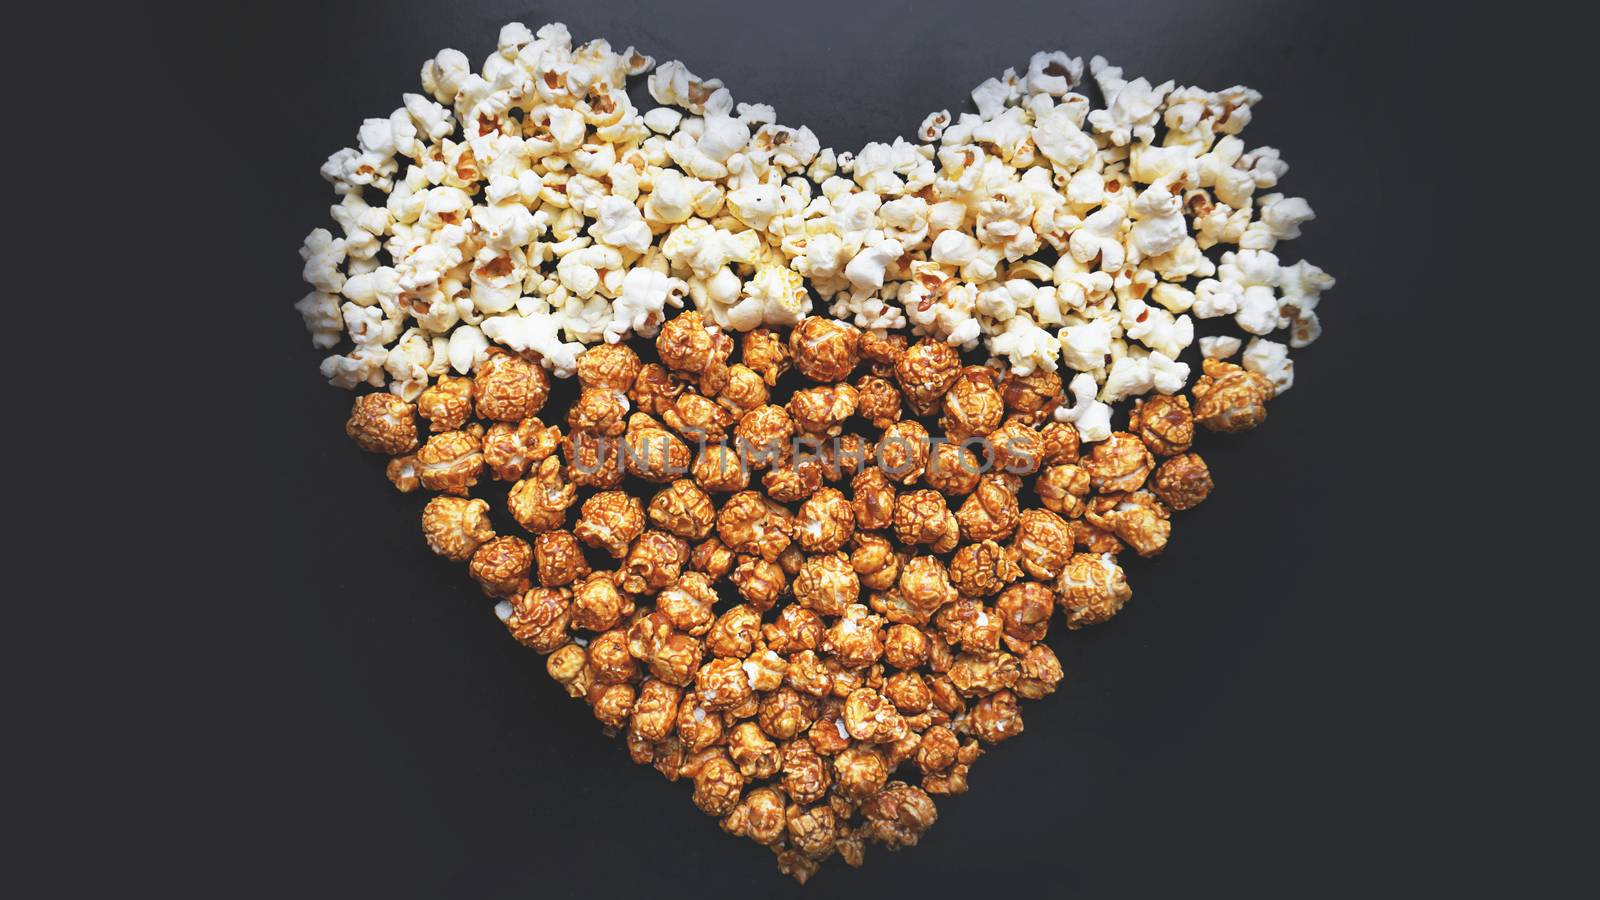 Love Cinema concept of popcorn arranged in a heart shape. Assorted popcorn by natali_brill